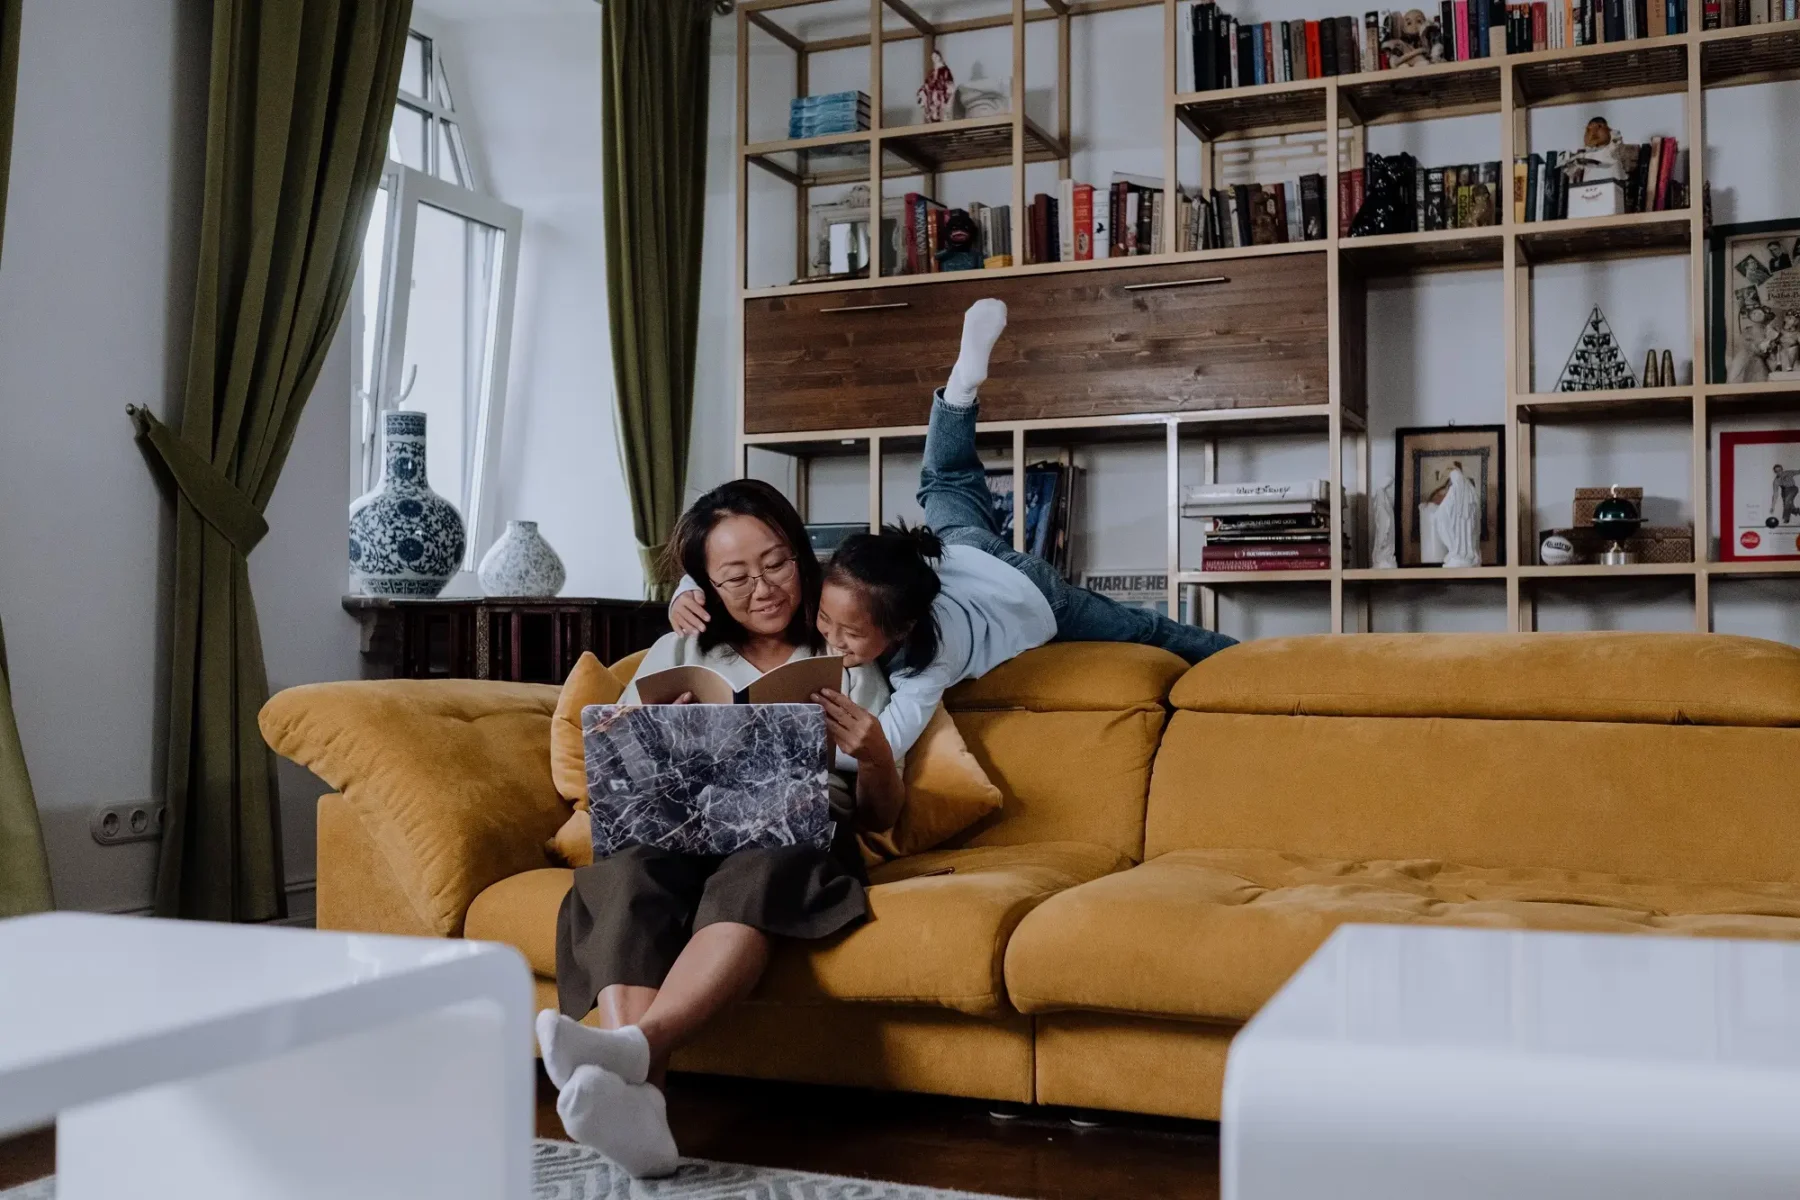 A young girl climbing over the back of a couch to embrace her mother who is reading a book and working on a laptop